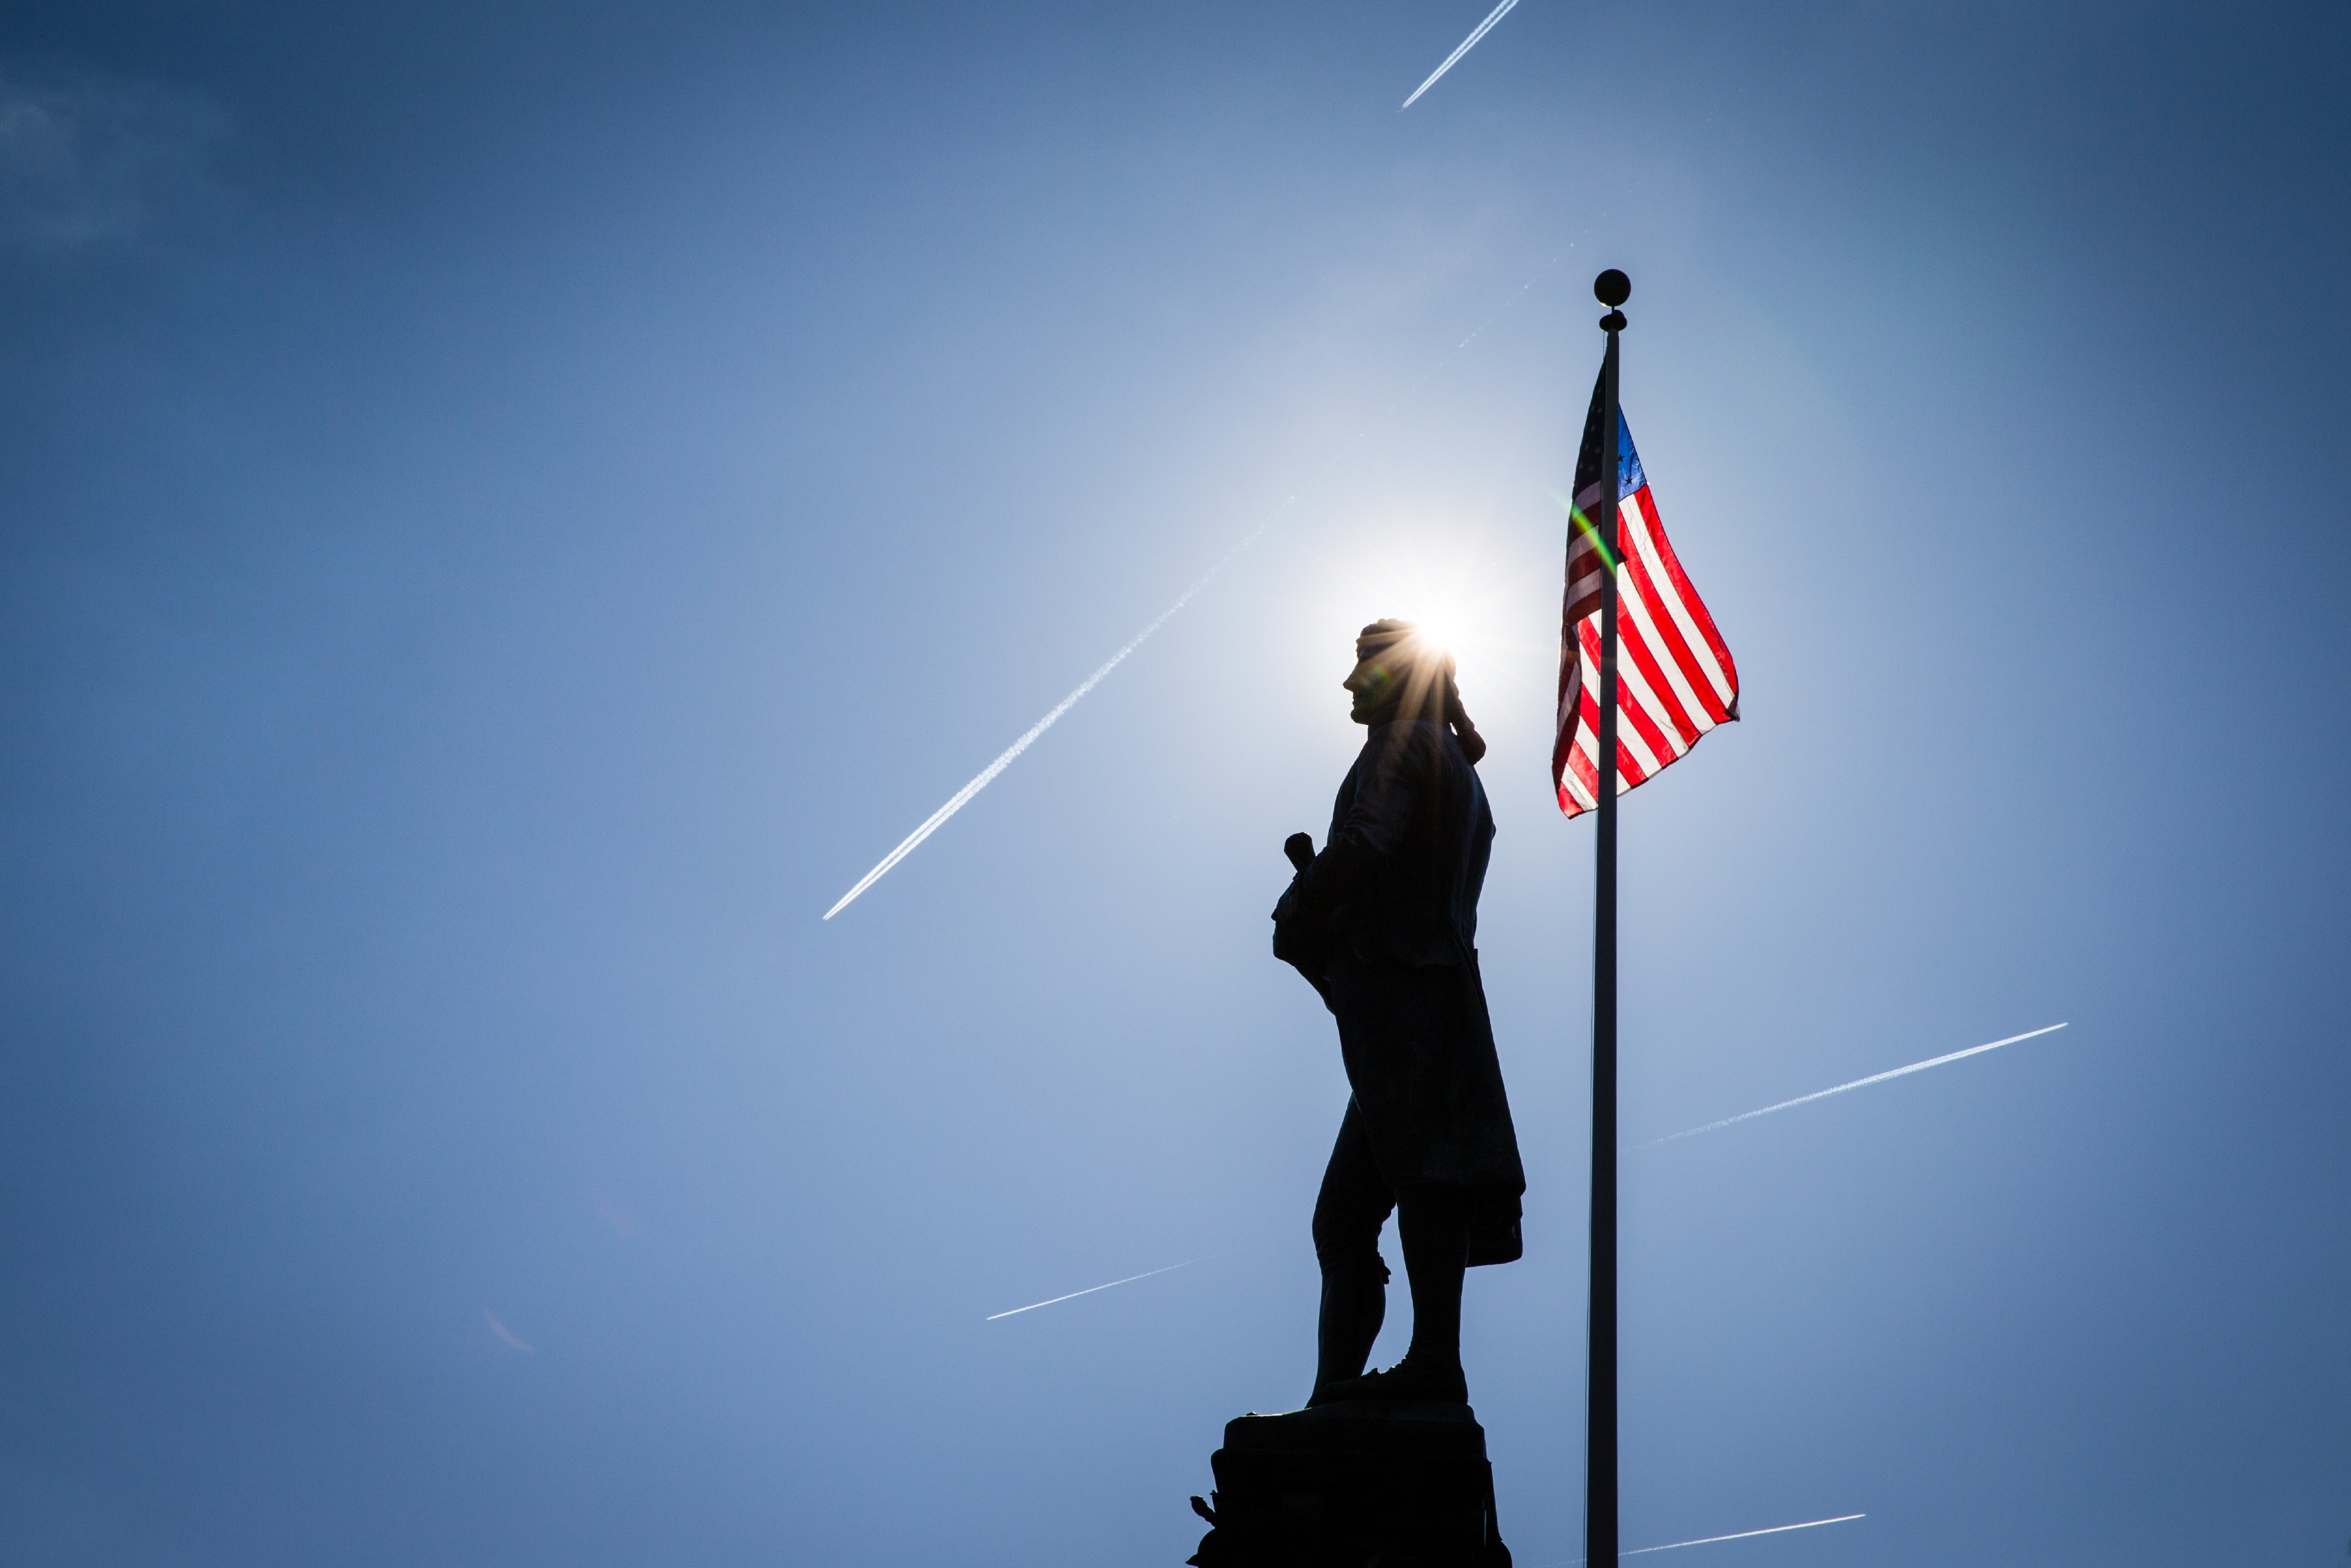 Thomas Jefferson statue silhouette with an American flag behind them and 5 planes in the sky 